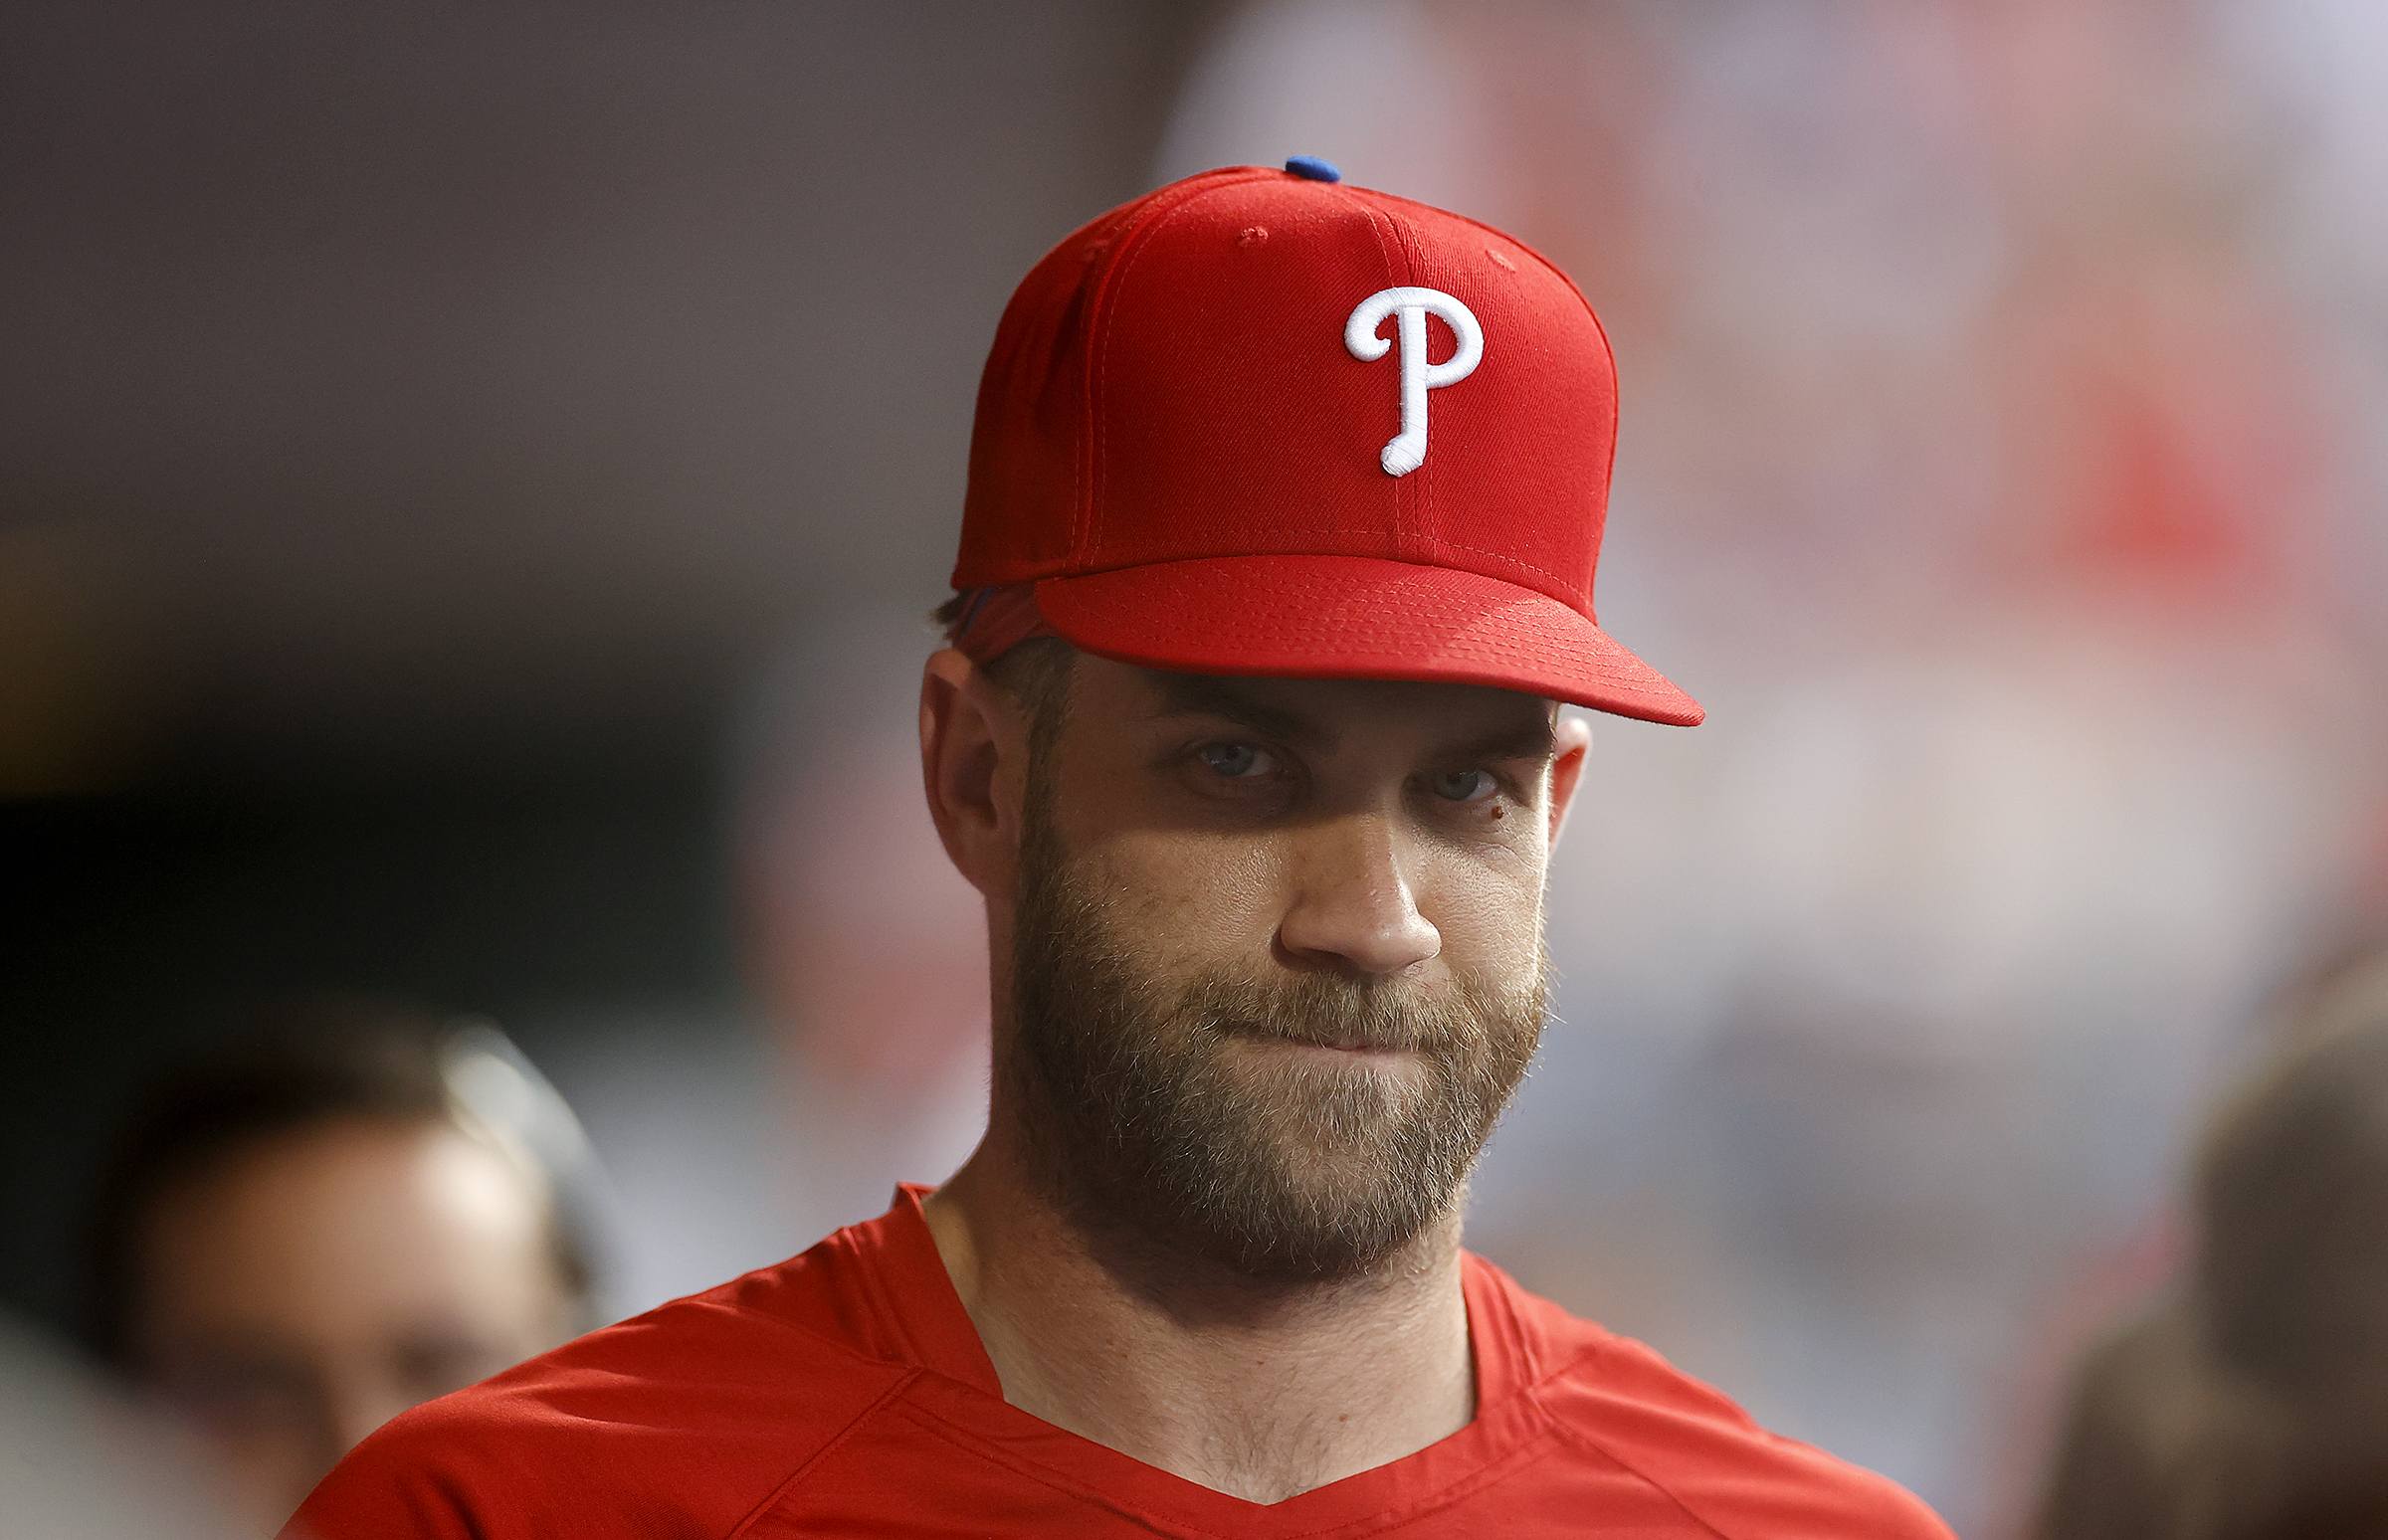 When will the Phillies' Bryce Harper return from Tommy John surgery?